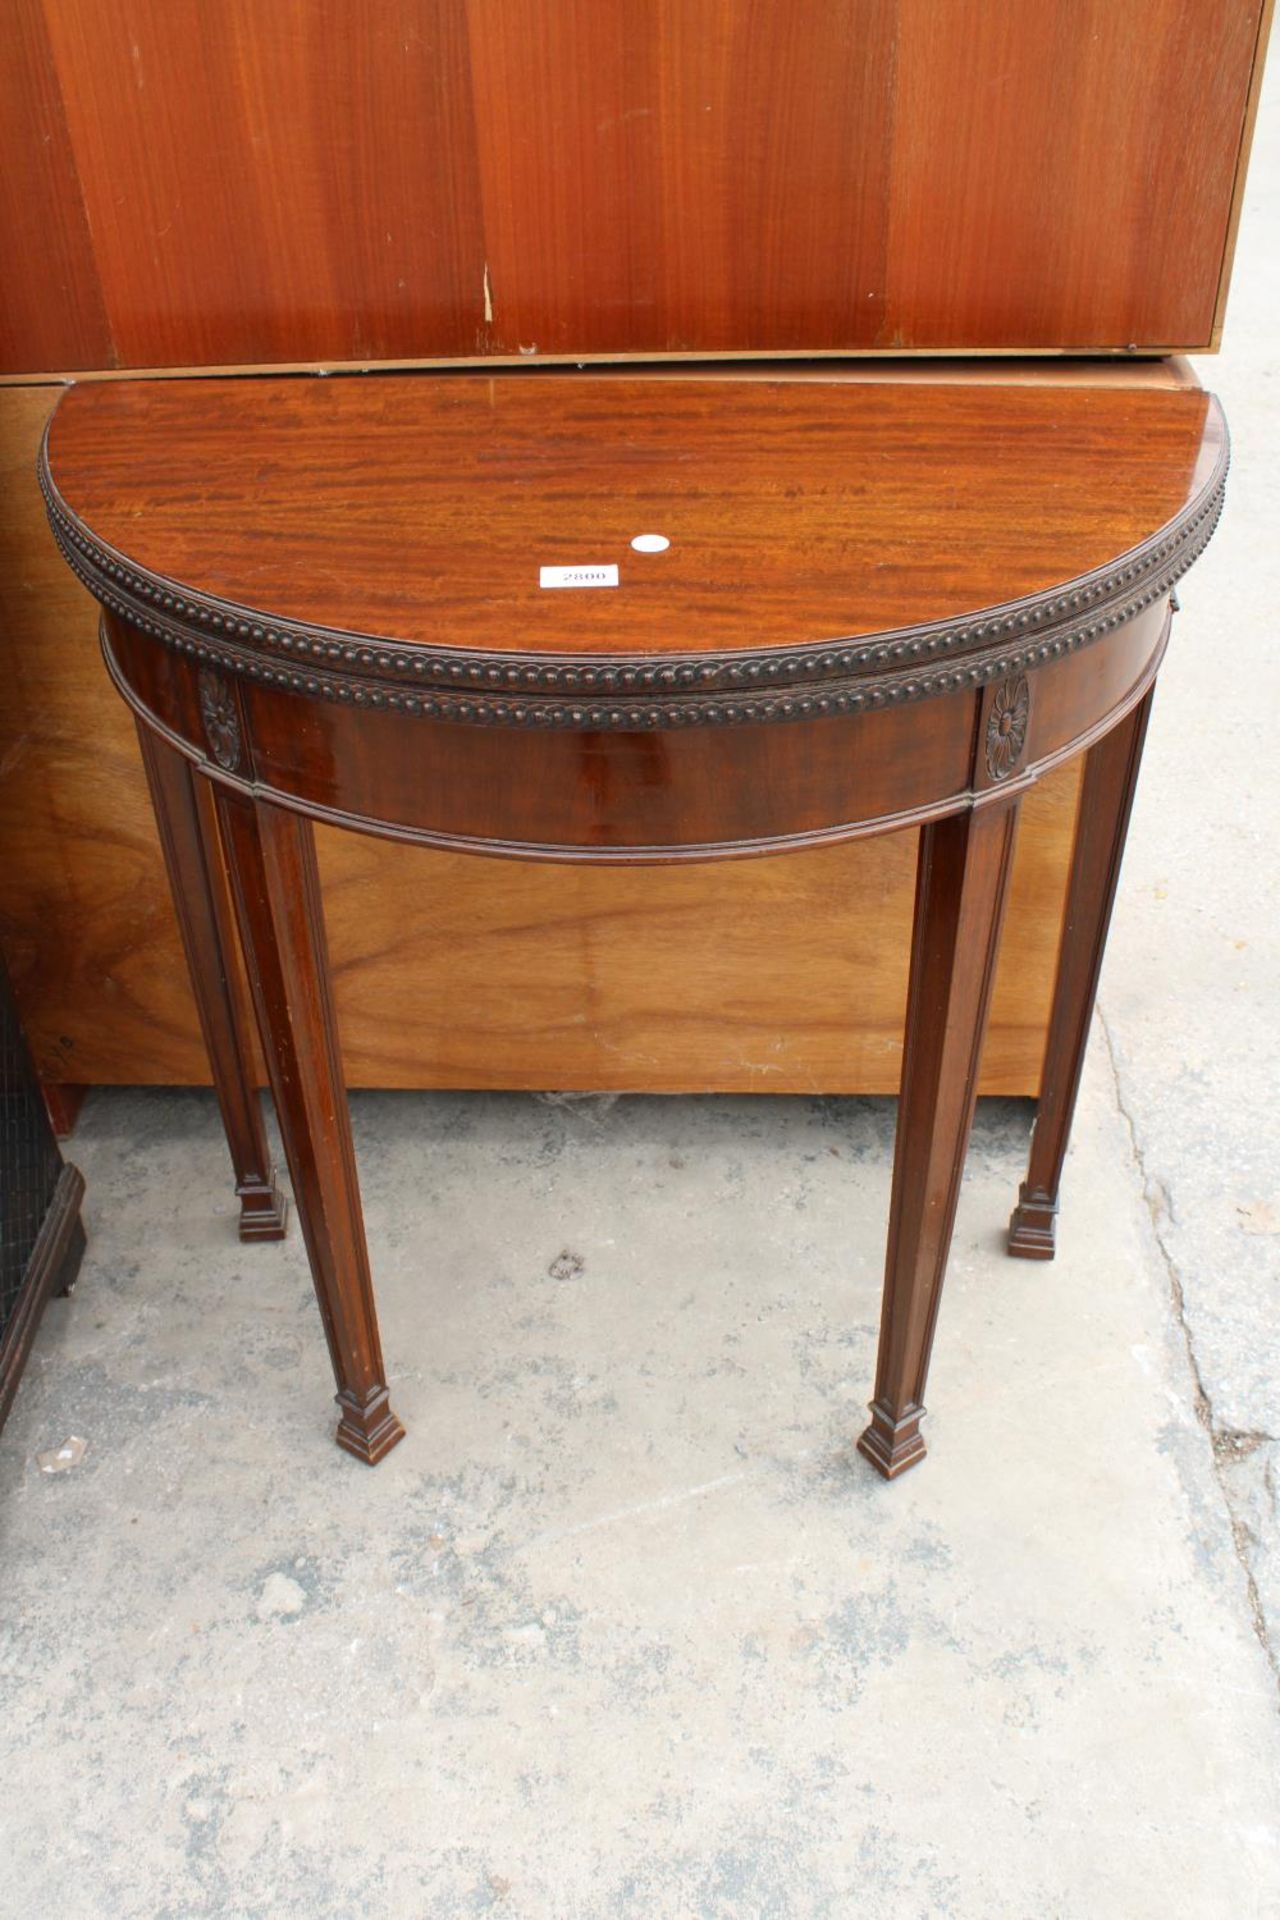 A 19TH CENTURY STYLE DEMI-LUNE GAMES TABLE, POSSIBLY BY WARING AND GILLOW, 28" WIDE